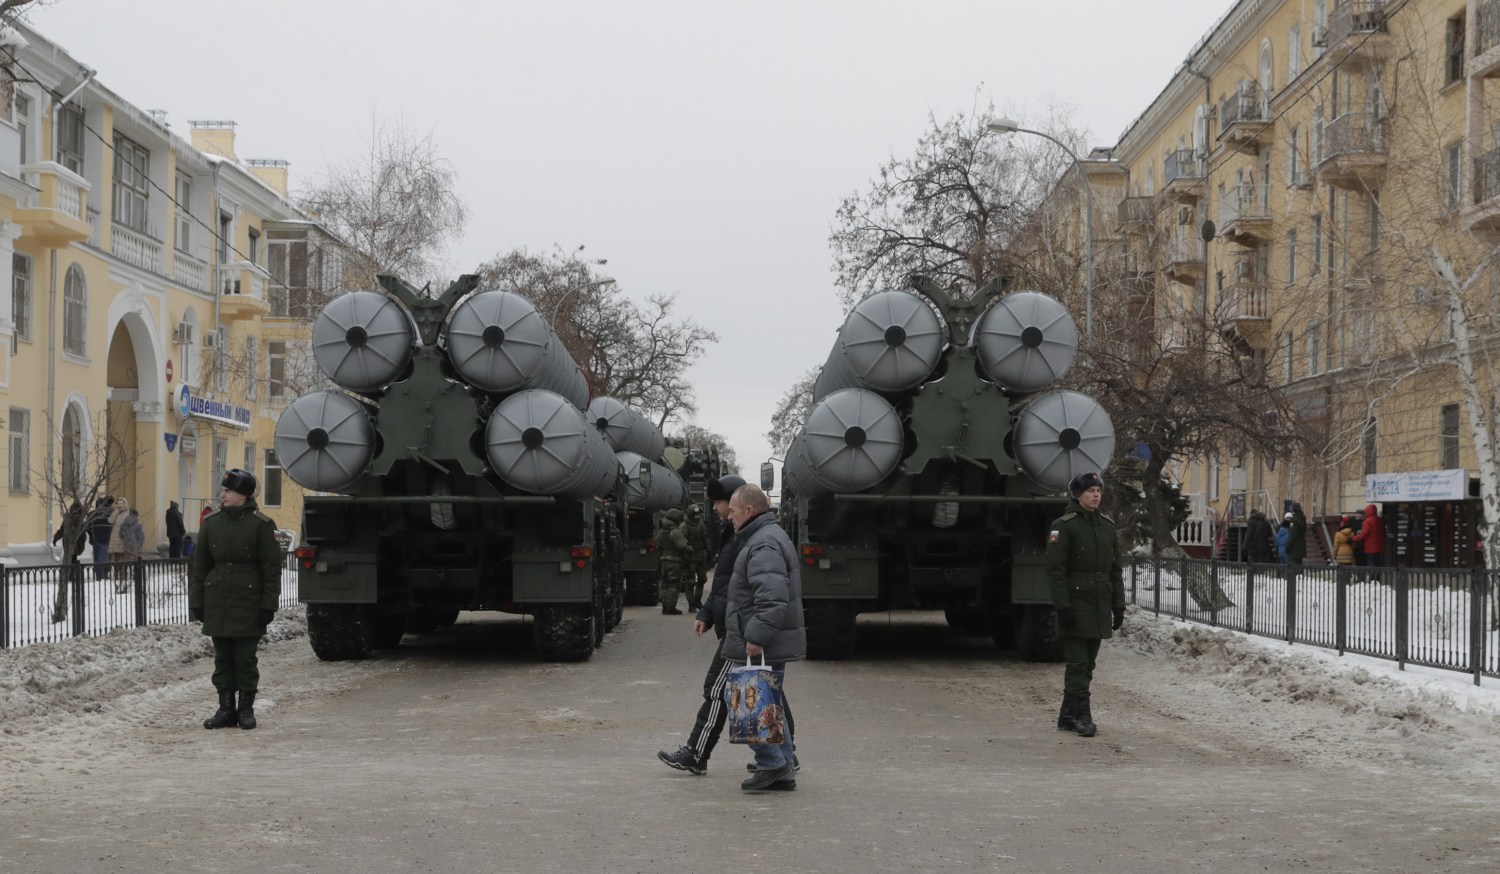 People walk past Russian S-400 missile air defence systems before the military parade to commemorate the 75th anniversary of the battle of Stalingrad in World War Two, in the city of Volgograd, Russia February 2, 2018. REUTERS/Tatyana Maleyeva - UP1EE220SDJ25